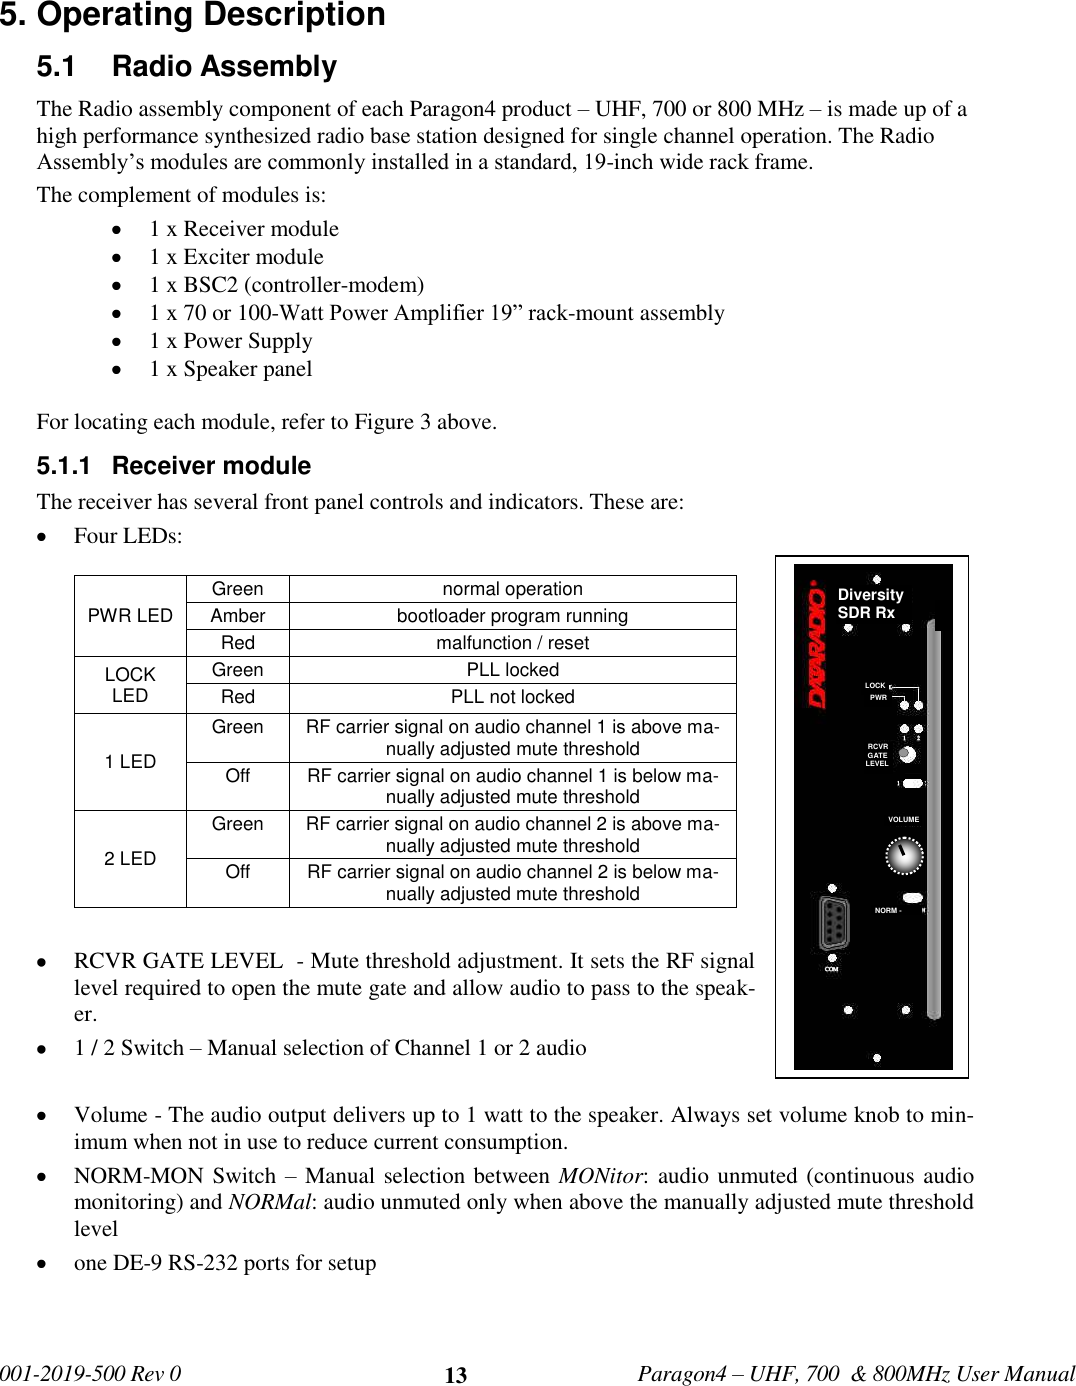   001-2019-500 Rev 0         Paragon4 – UHF, 700  &amp; 800MHz User Manual     13   LOCK   PWR  RCVR  GATE LEVEL  VOLUME  NORM - MON   Diversity SDR Rx 5. Operating Description 5.1  Radio Assembly The Radio assembly component of each Paragon4 product – UHF, 700 or 800 MHz – is made up of a high performance synthesized radio base station designed for single channel operation. The Radio Assembly’s modules are commonly installed in a standard, 19-inch wide rack frame.  The complement of modules is:  1 x Receiver module  1 x Exciter module  1 x BSC2 (controller-modem)  1 x 70 or 100-Watt Power Amplifier 19” rack-mount assembly   1 x Power Supply  1 x Speaker panel  For locating each module, refer to Figure 3 above.  5.1.1  Receiver module The receiver has several front panel controls and indicators. These are:  Four LEDs:  PWR LED Green  normal operation Amber  bootloader program running Red  malfunction / reset LOCK LED Green  PLL locked Red          PLL not locked 1 LED Green  RF carrier signal on audio channel 1 is above ma-nually adjusted mute threshold Off  RF carrier signal on audio channel 1 is below ma-nually adjusted mute threshold 2 LED Green  RF carrier signal on audio channel 2 is above ma-nually adjusted mute threshold Off  RF carrier signal on audio channel 2 is below ma-nually adjusted mute threshold   RCVR GATE LEVEL  - Mute threshold adjustment. It sets the RF signal level required to open the mute gate and allow audio to pass to the speak-er.  1 / 2 Switch – Manual selection of Channel 1 or 2 audio   Volume - The audio output delivers up to 1 watt to the speaker. Always set volume knob to min-imum when not in use to reduce current consumption.  NORM-MON Switch – Manual selection between MONitor: audio unmuted (continuous audio monitoring) and NORMal: audio unmuted only when above the manually adjusted mute threshold level  one DE-9 RS-232 ports for setup  